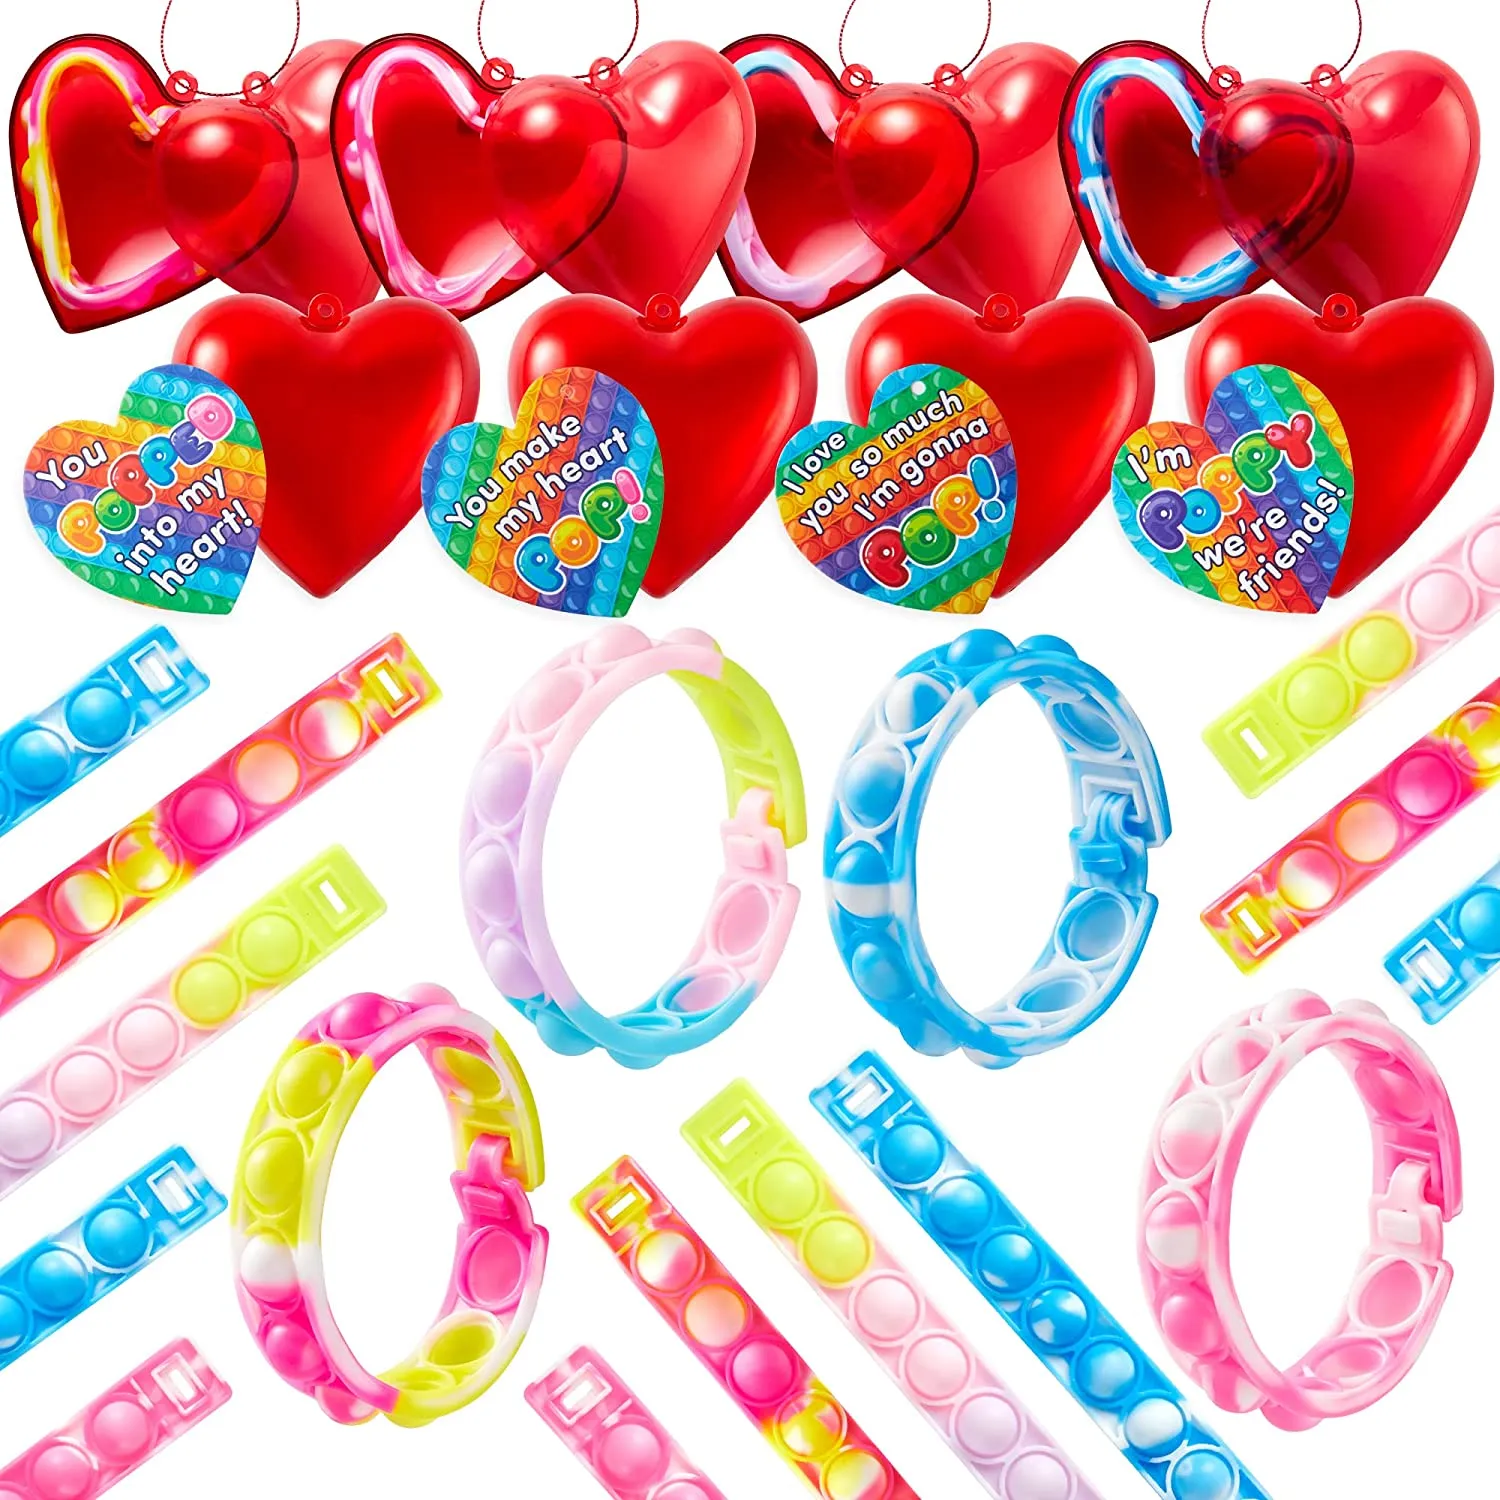 Kids Valentines Day Gifts for Classroom - Valentine Prefilled Hearts with  Poppers Fidget Keychains and Gift Tags for Boys Girls Exchange Gifts, Party